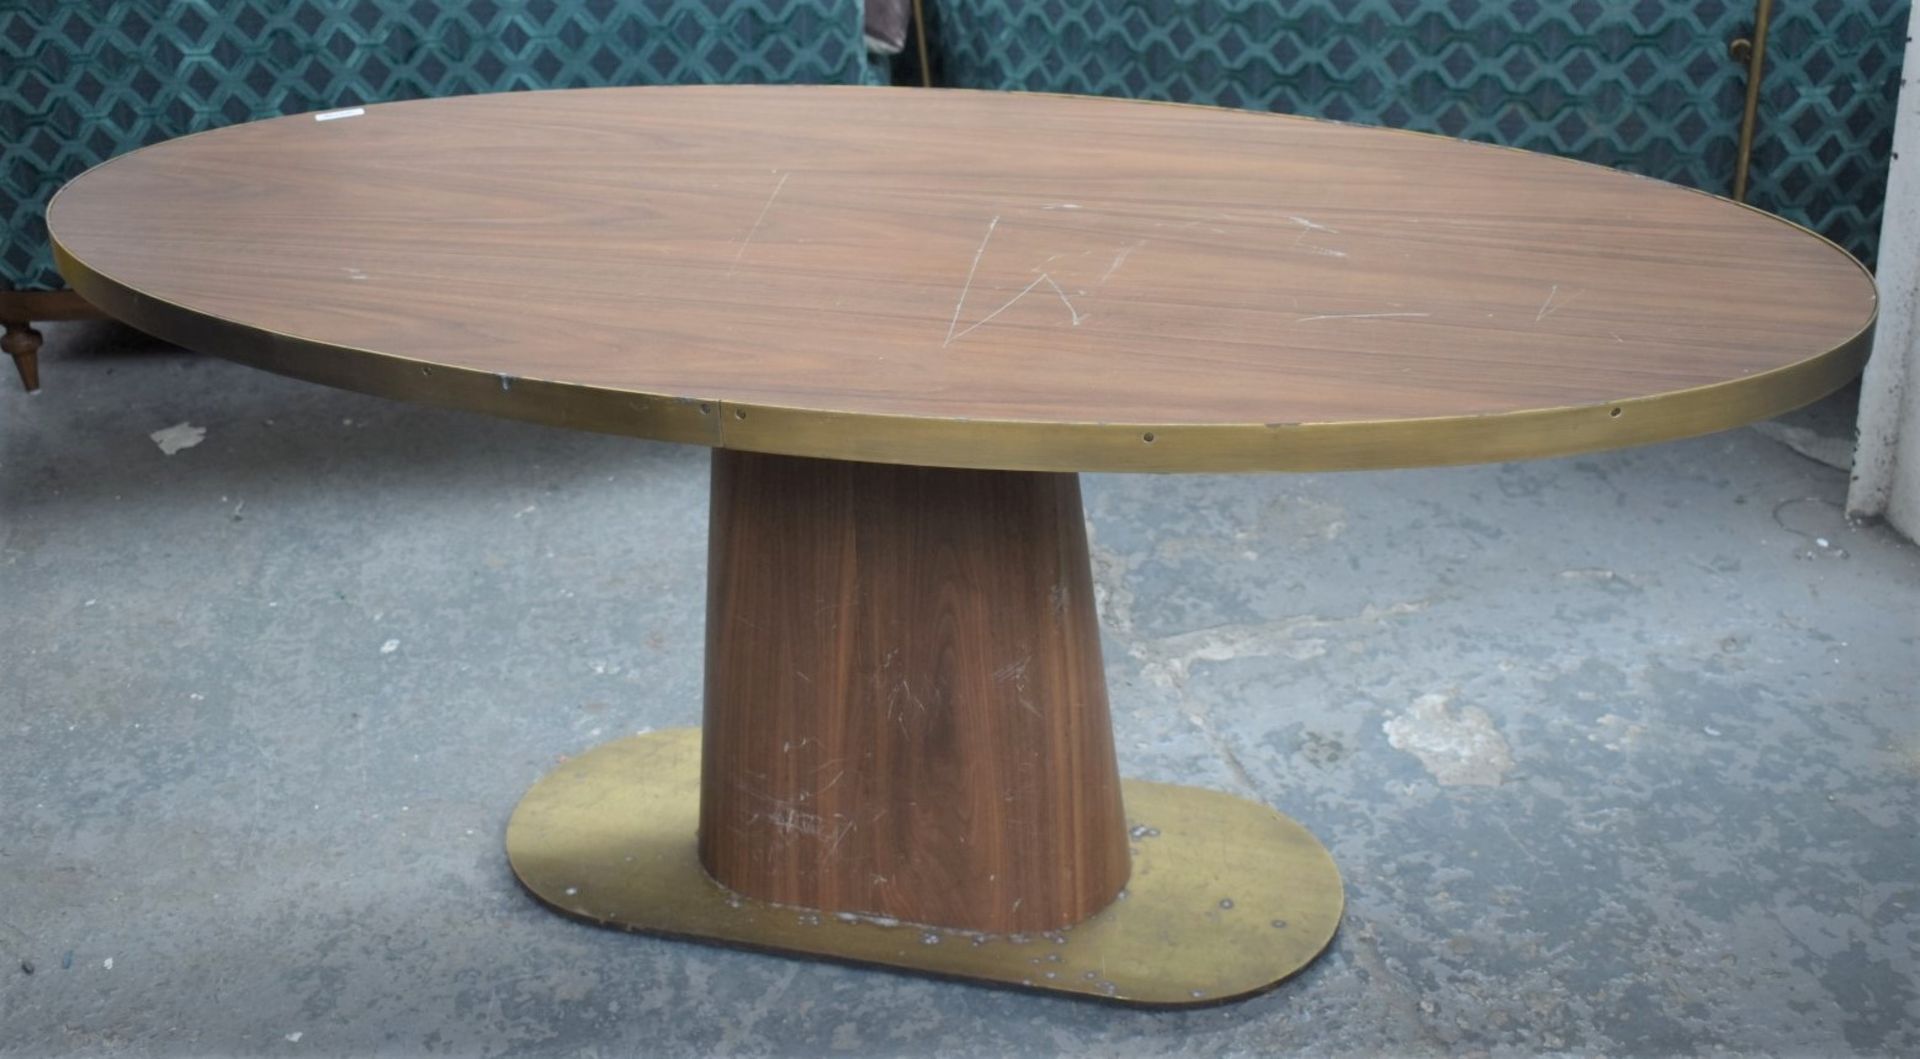 1 x Oval Banqueting Dining Table By AKP Design Athens - Walnut Top With Antique Brass Edging - Image 5 of 10